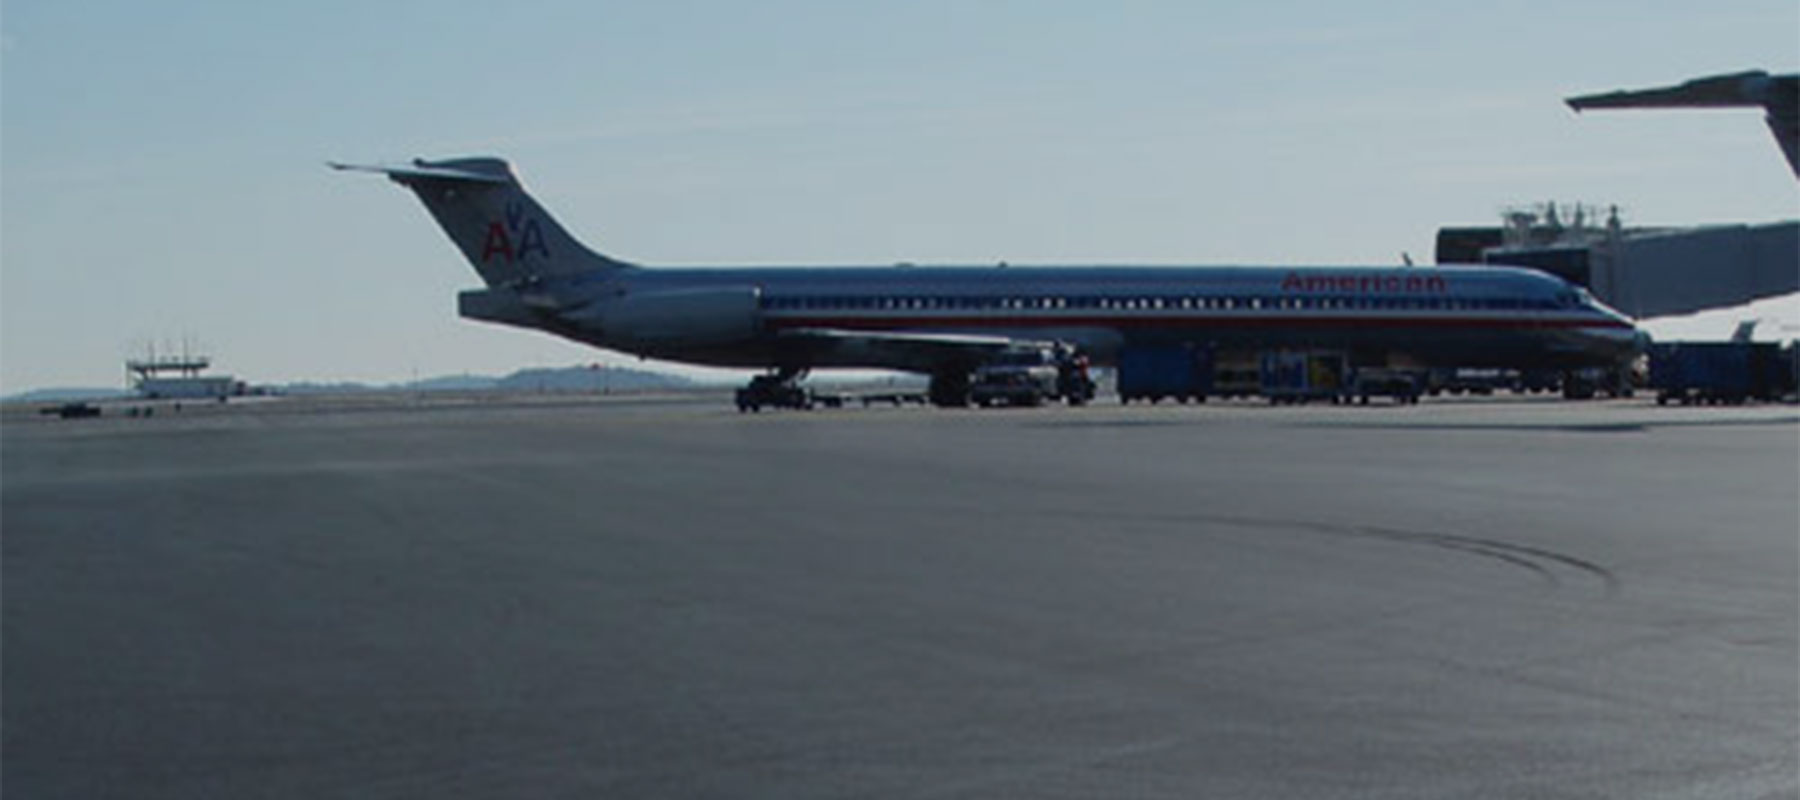 A large American Airlines plane on the tarmac at Logan Airport.